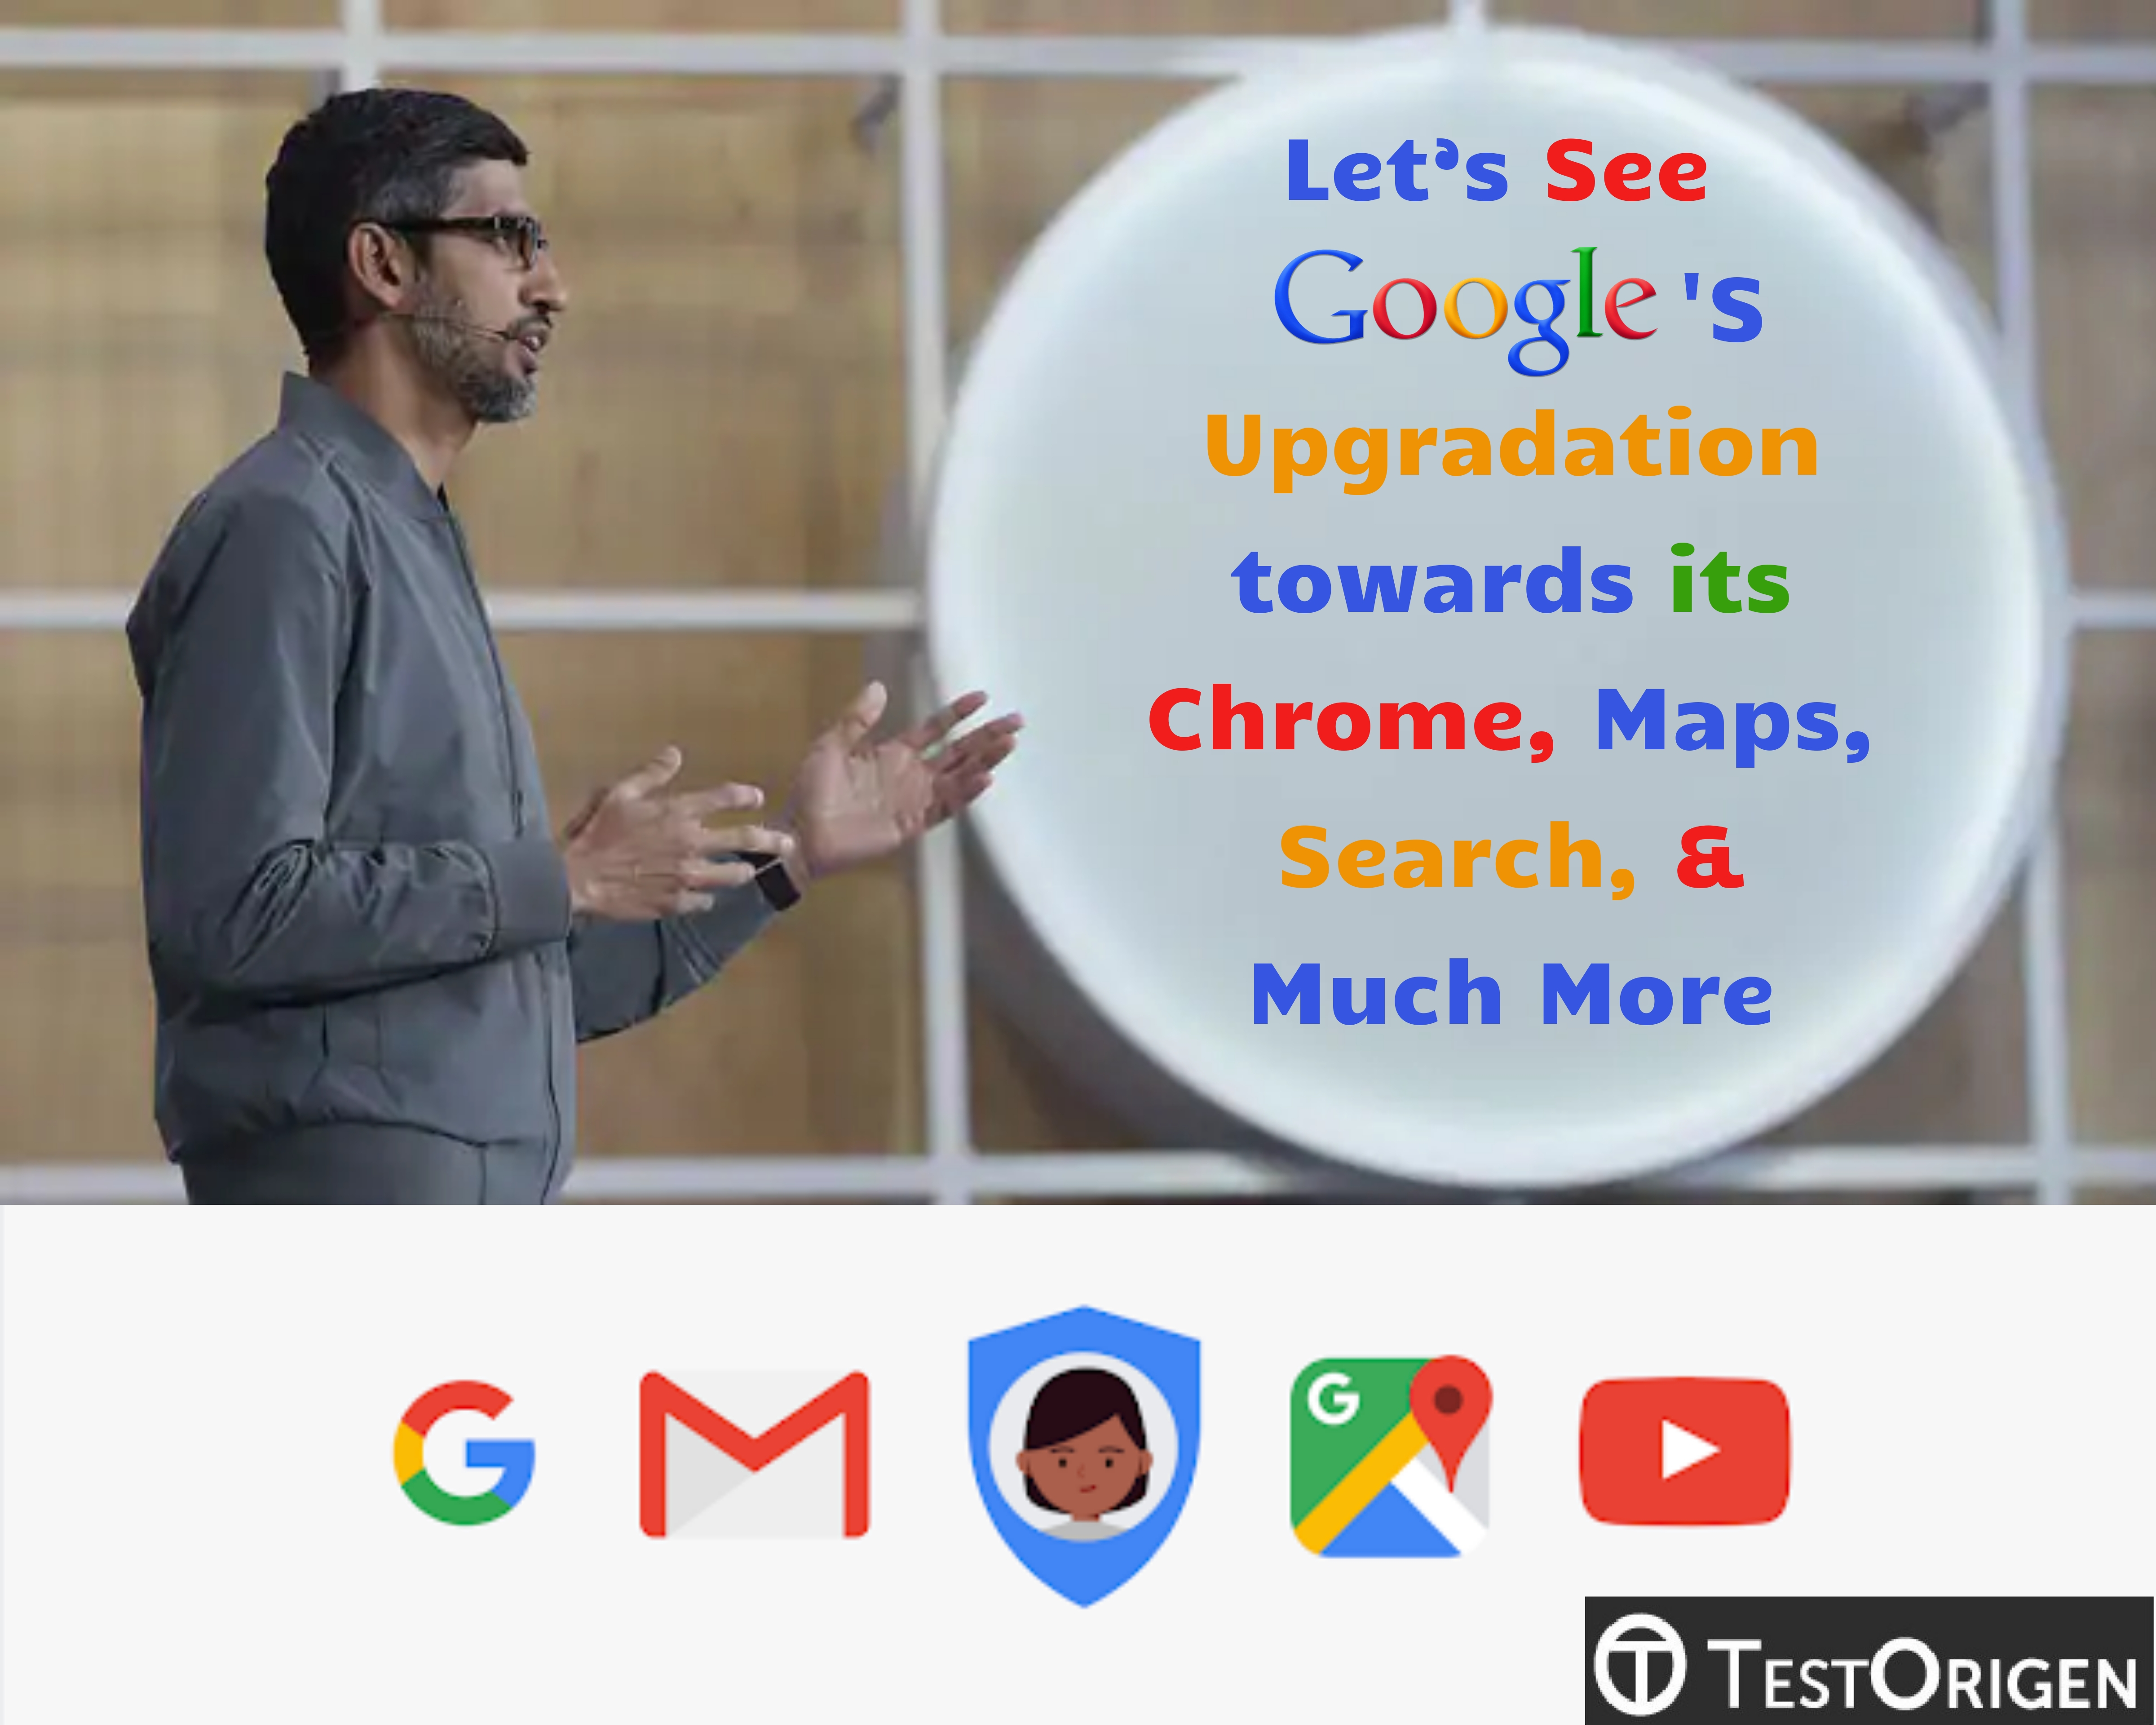 Let’s See Google’s Upgradation towards its Chrome, Maps, Search, & Much More